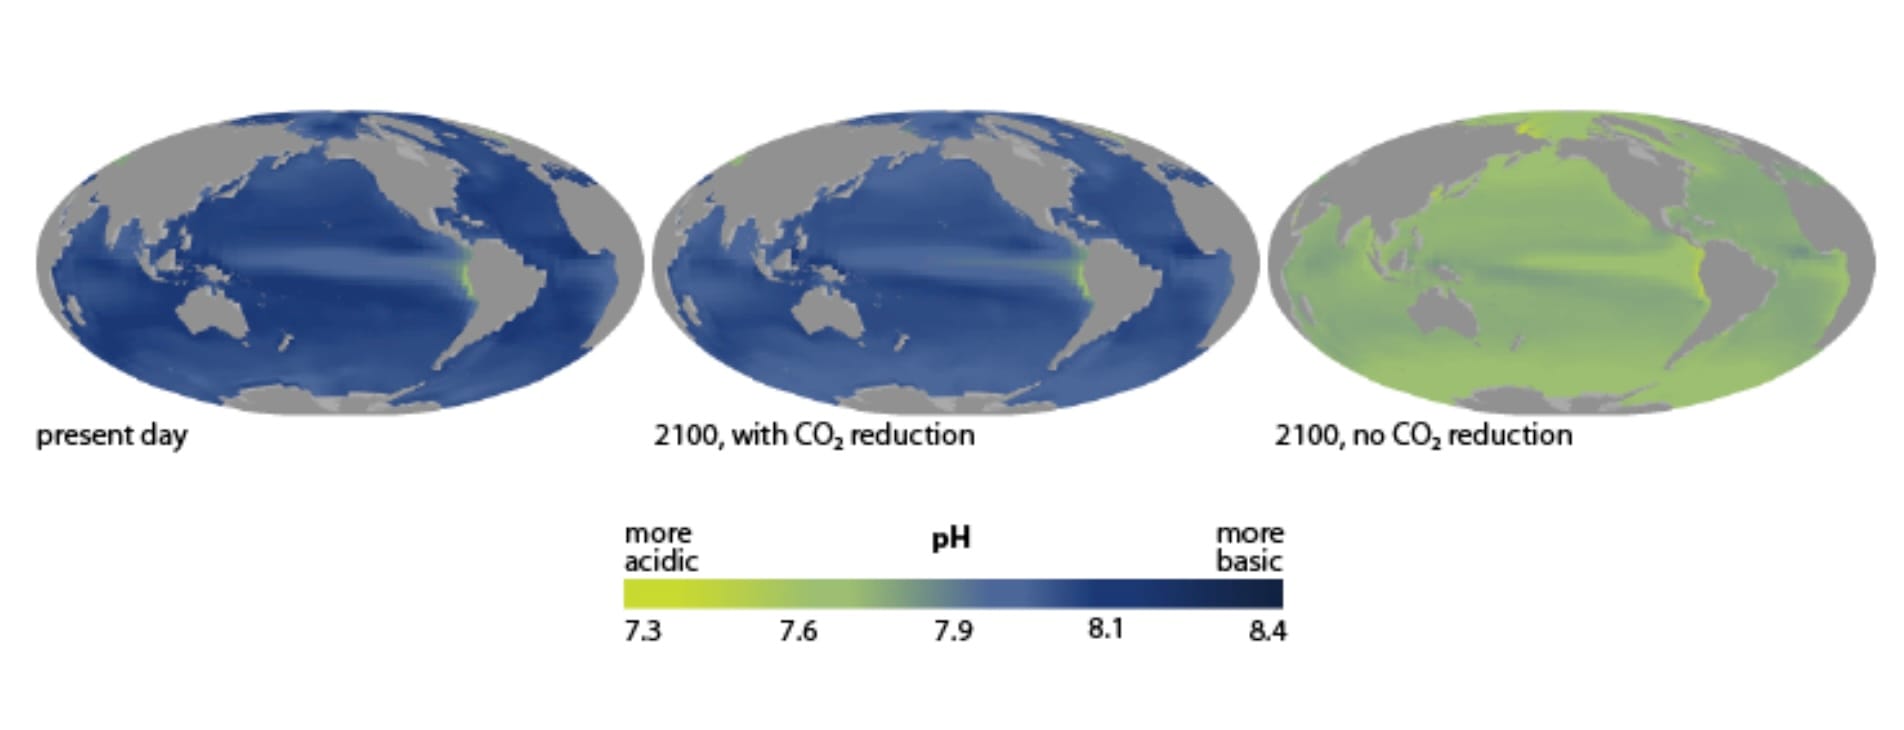 World ocean map showing severe acidification is likely by 2100